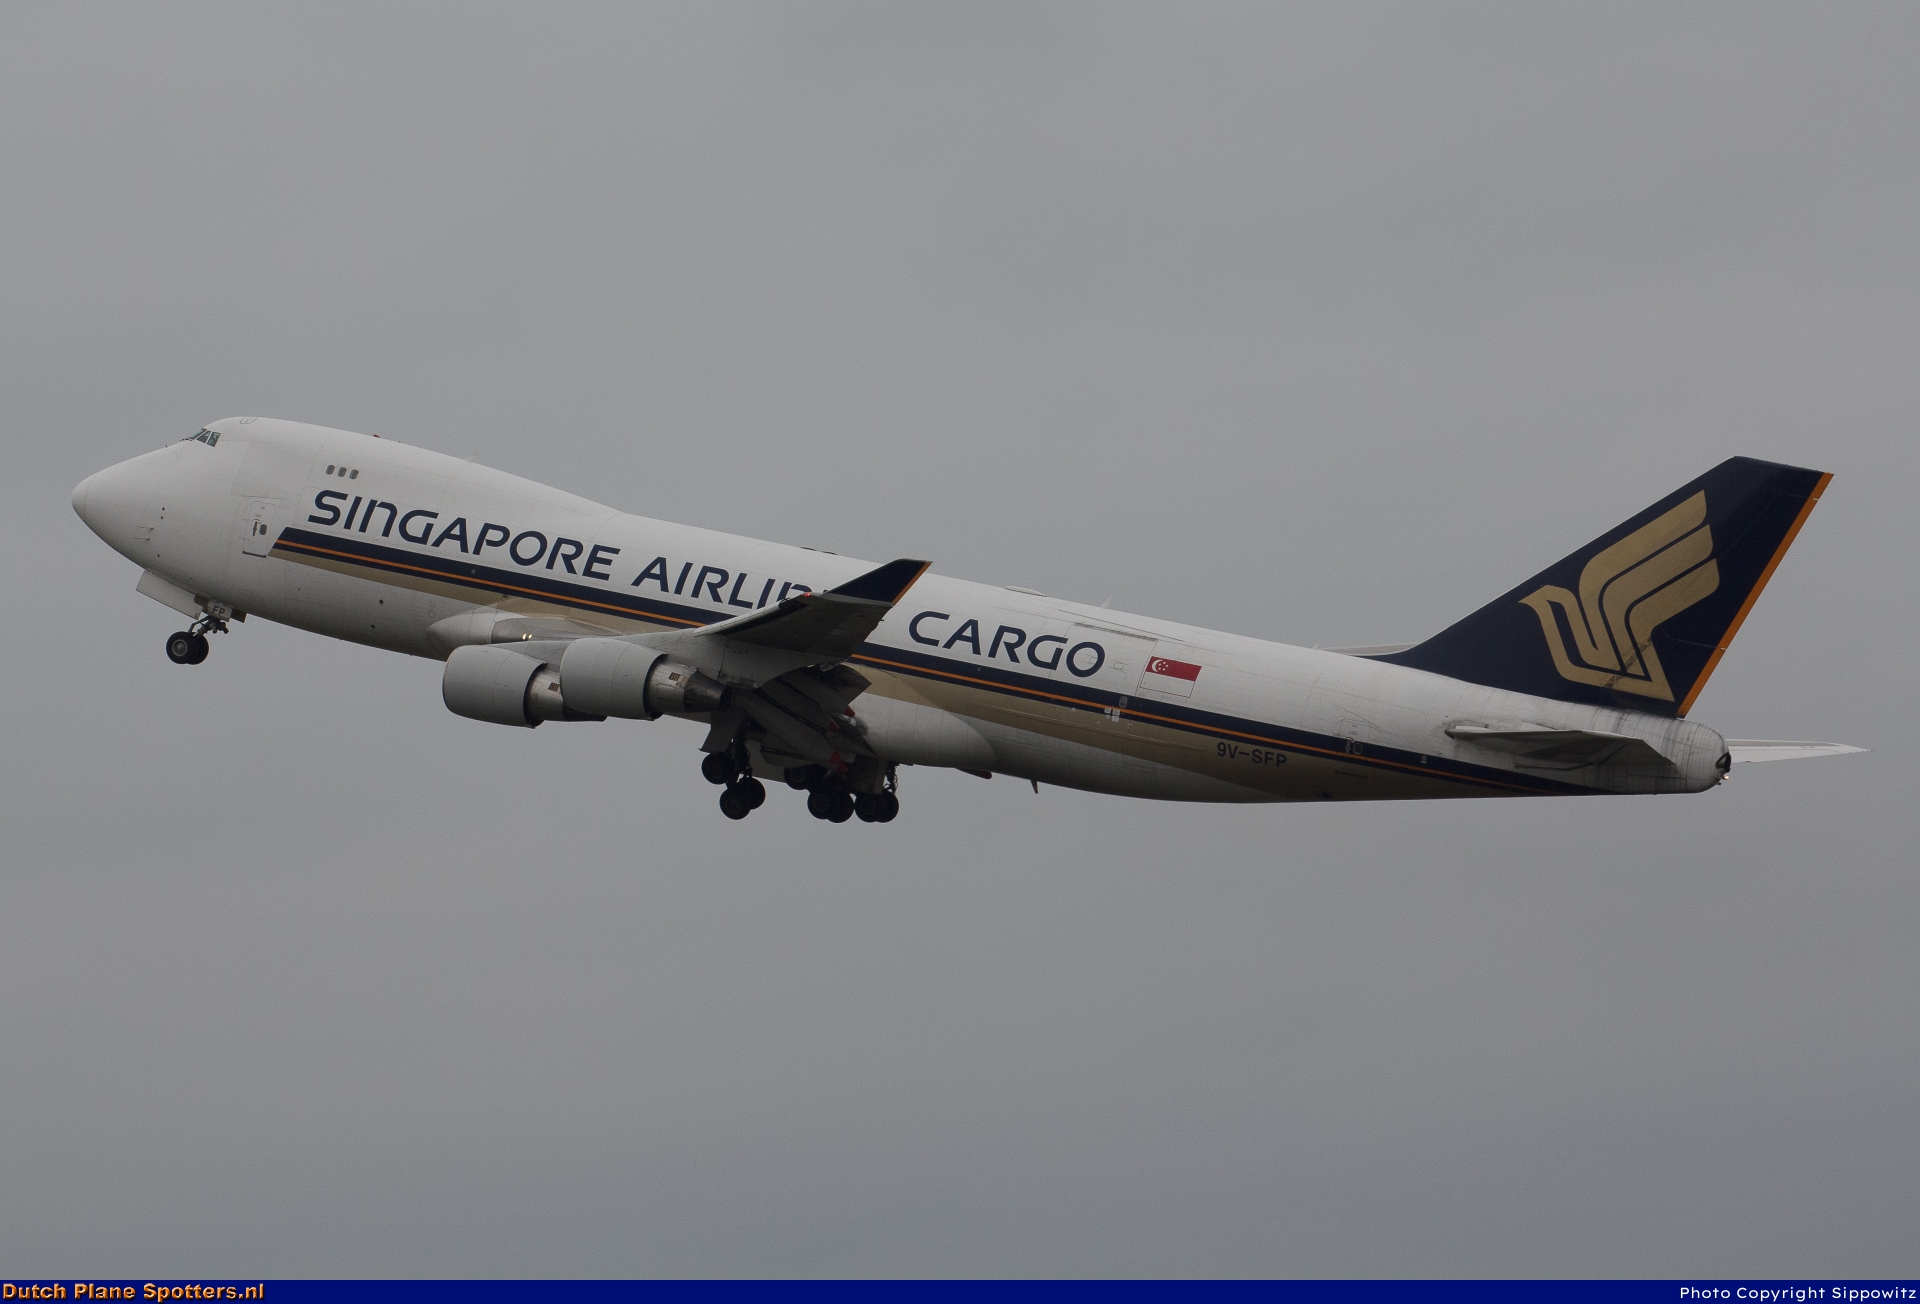 9V-SFP Boeing 747-400 Singapore Airlines Cargo by Sippowitz